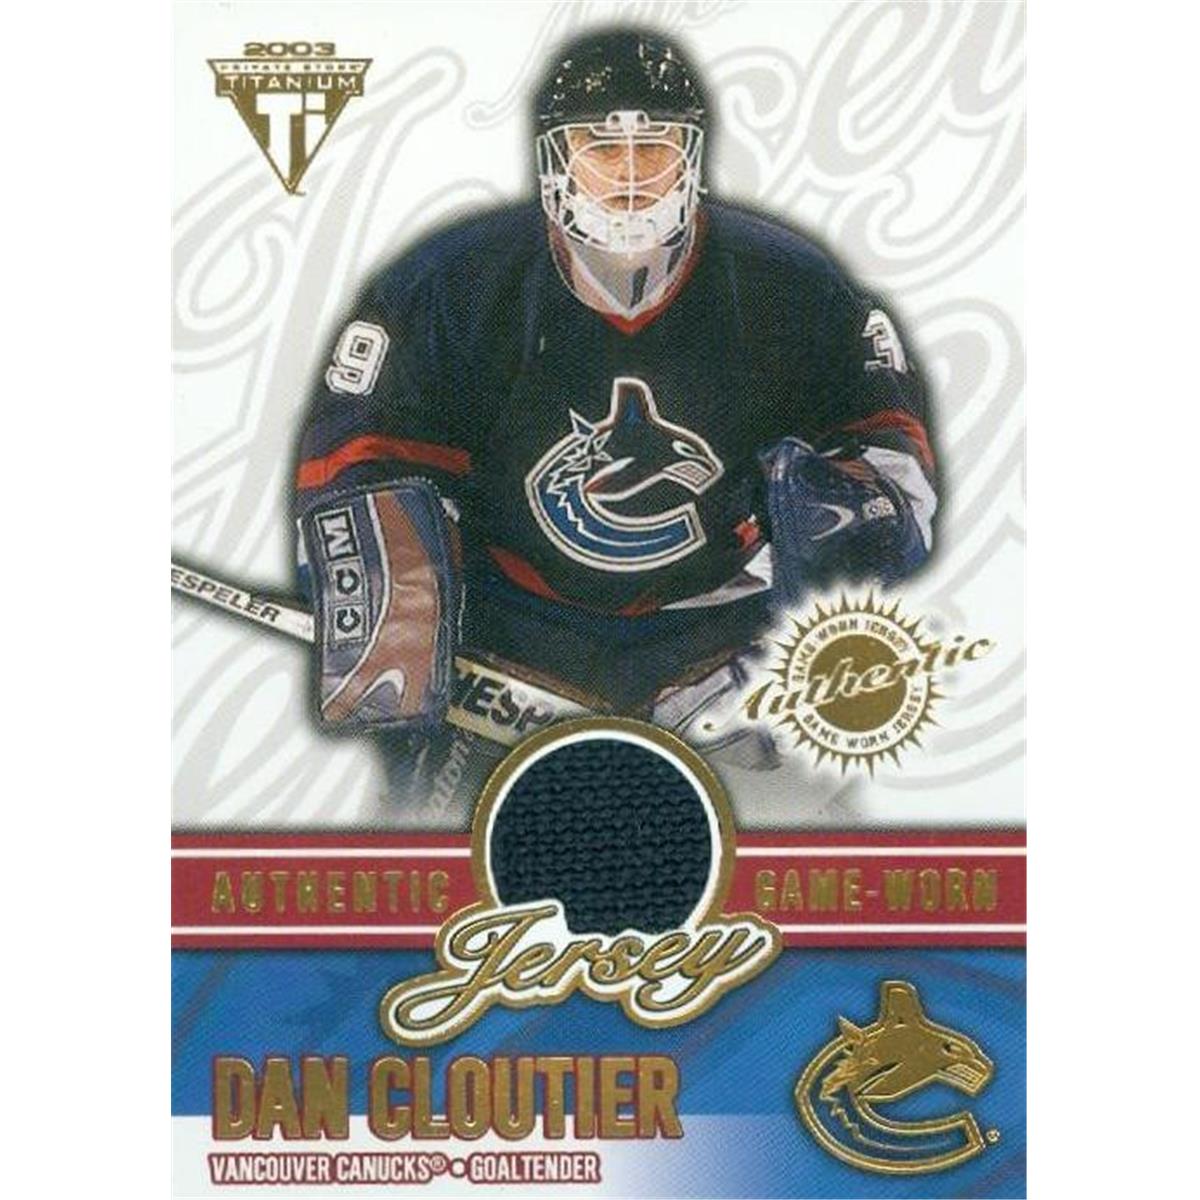 Picture of Autograph Warehouse 466244 Dan Cloutier Player Vancouver Canucks Worn Jersey Patch Hockey Card 2003 Pacific Titanium No. 69